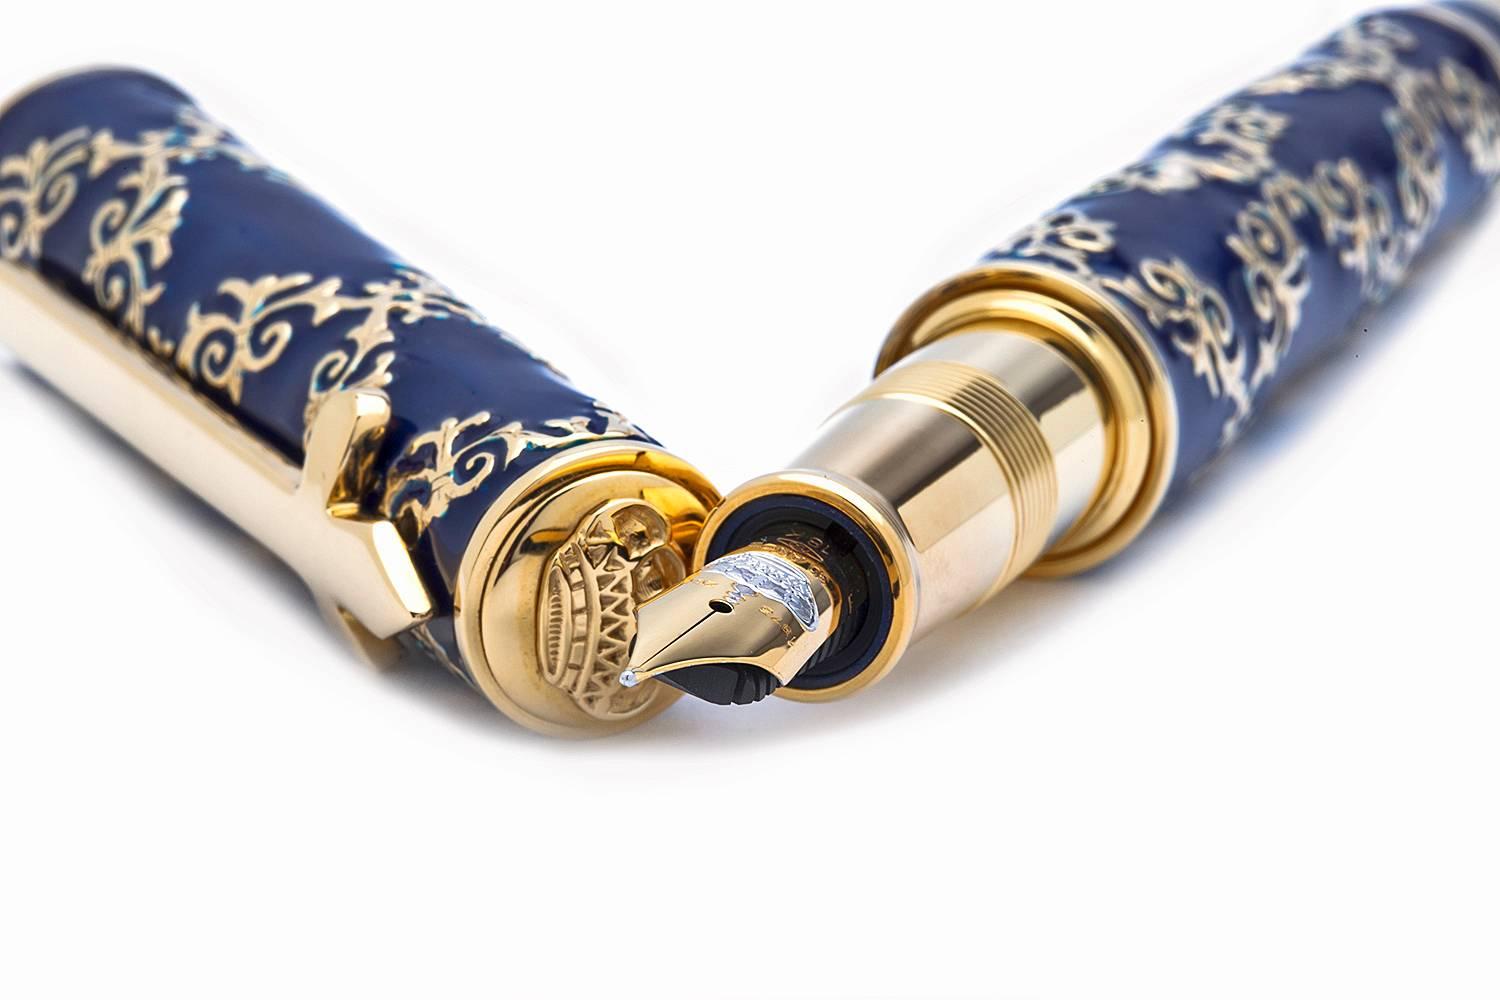 OMAS Spanish Royal Family Limited Edition Fountain Pen. Only 30 pieces made, Number 29/30. 18K Yellow Gold and Bourbon Blue Enamel, Blue Bourbon Enamel is Bourbon's Royal Family color. On the head of the cap there is the Crown, the symbol of the